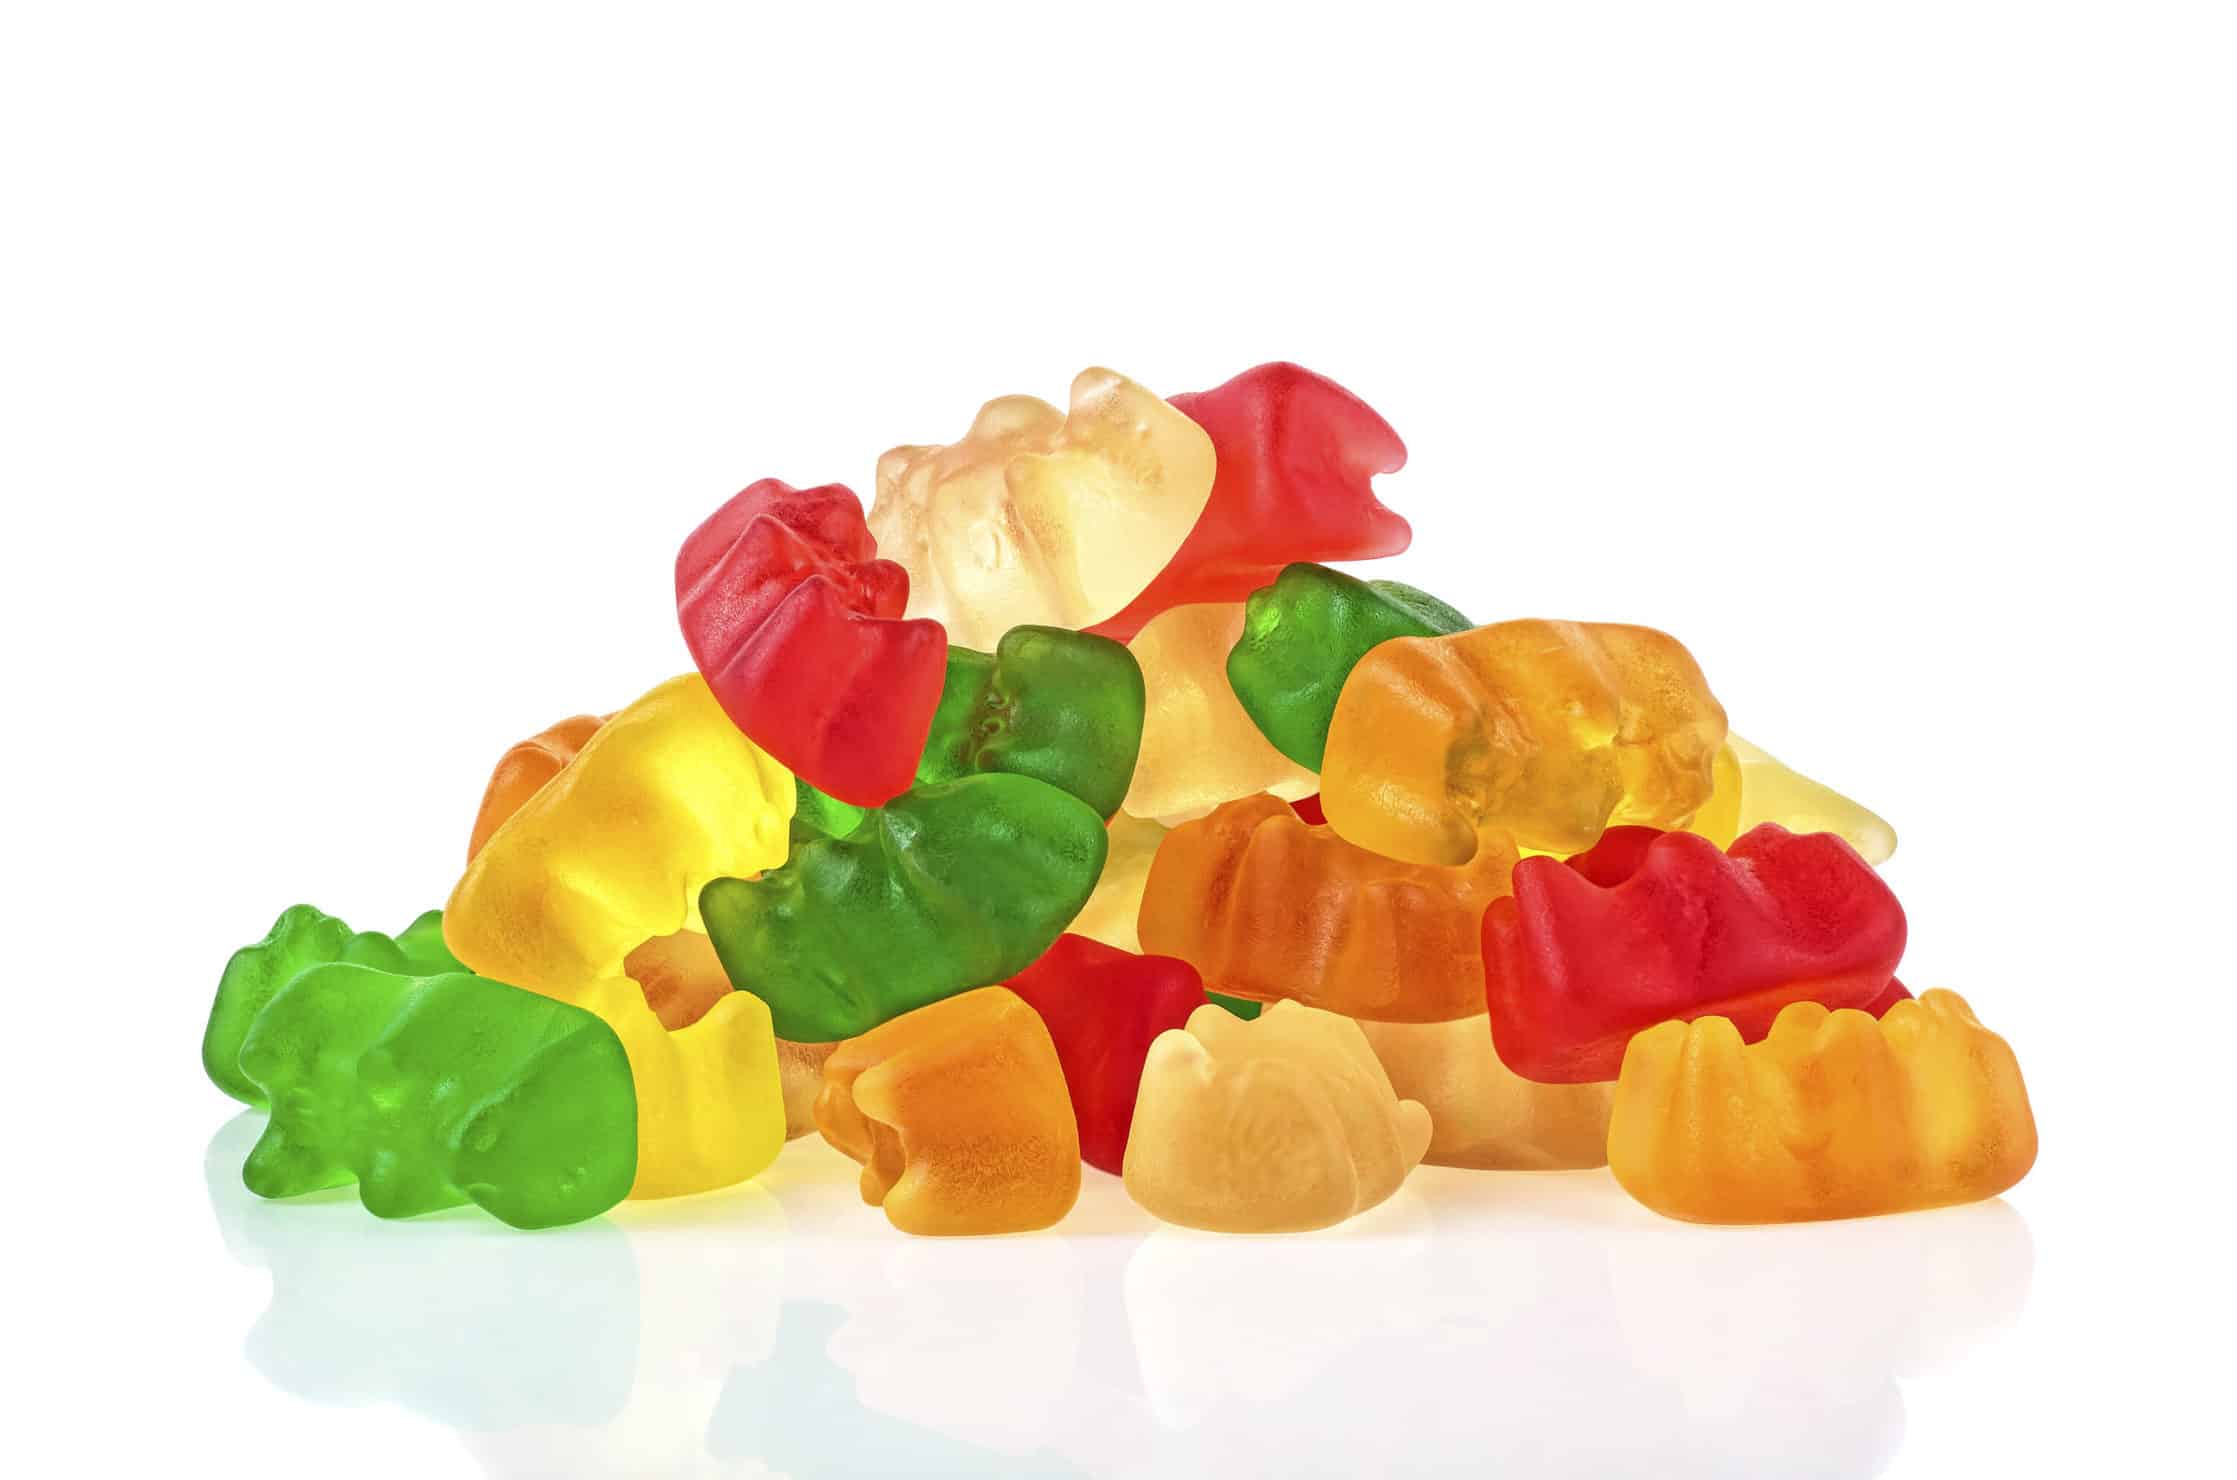 A pile of CBD gummies on a white surface.